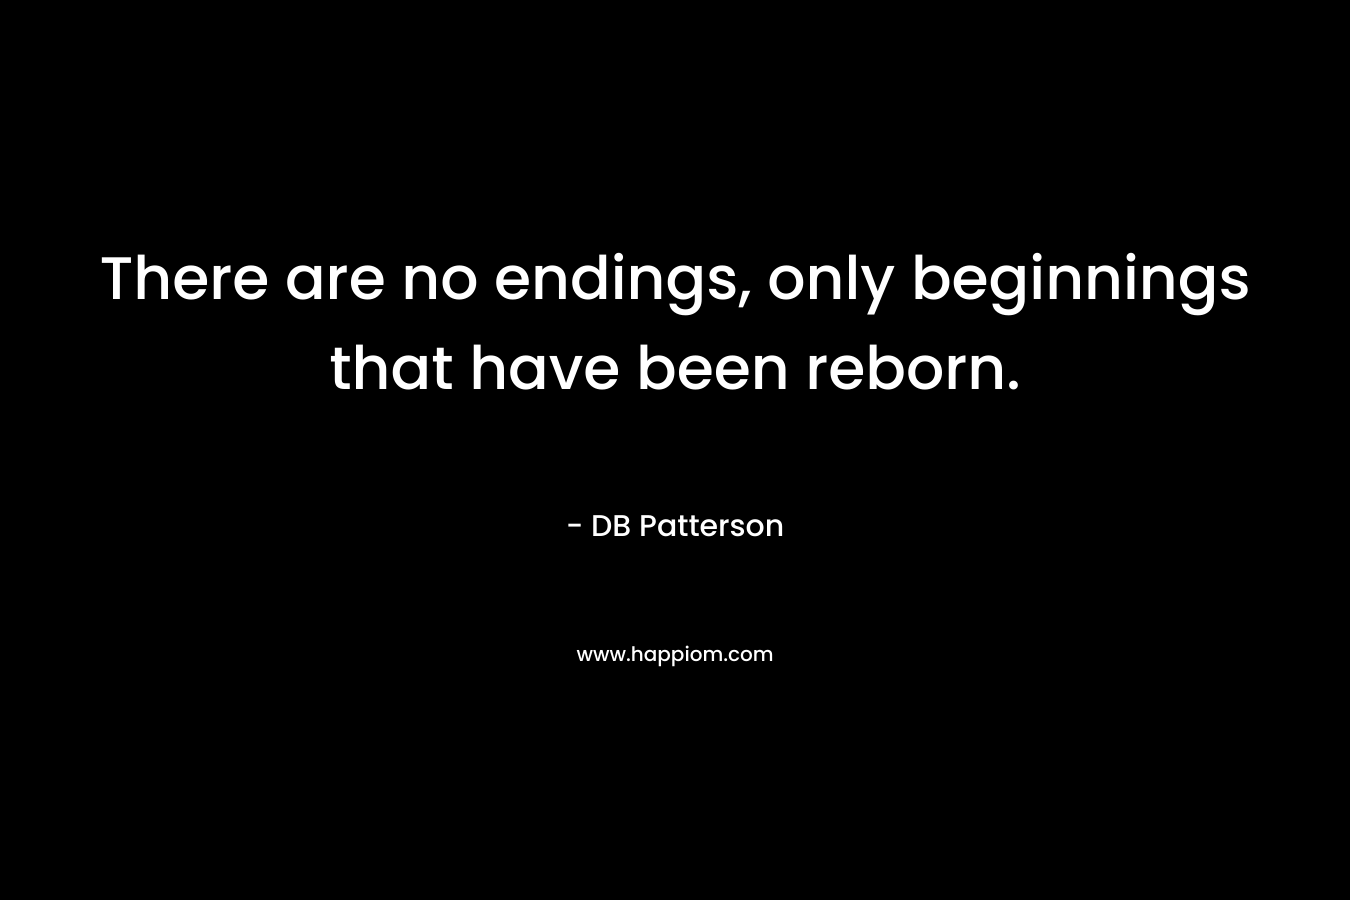 There are no endings, only beginnings that have been reborn. – DB Patterson